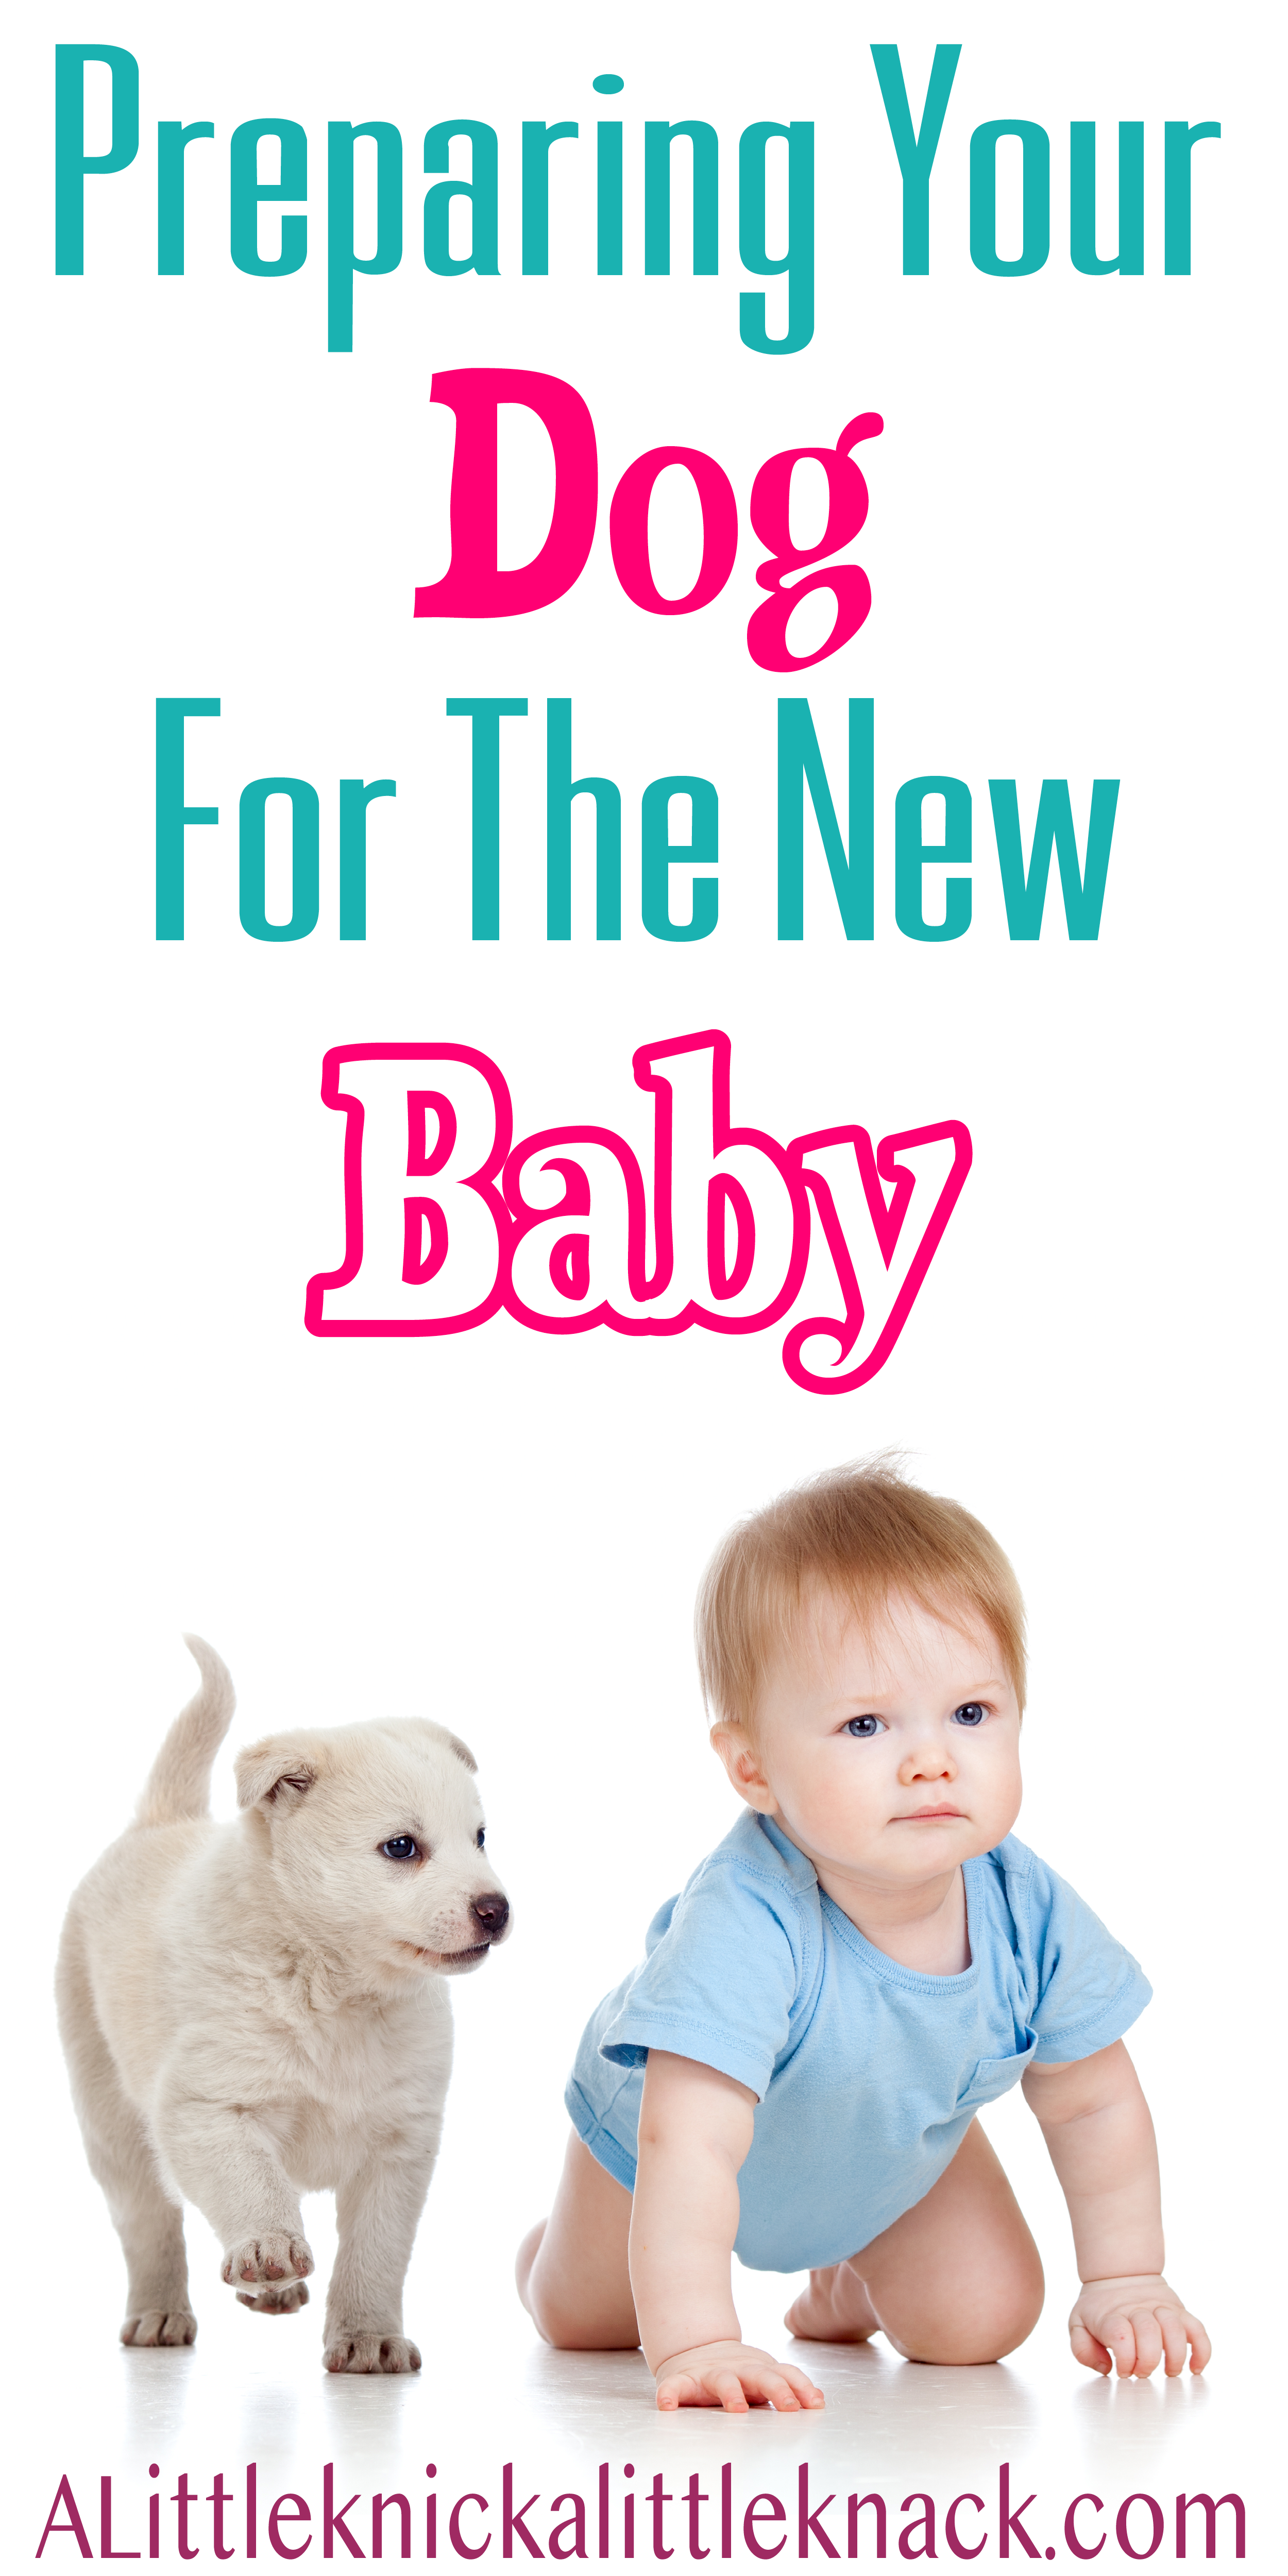 Baby in blue onesie crawling next to a puppy with a text overlay.